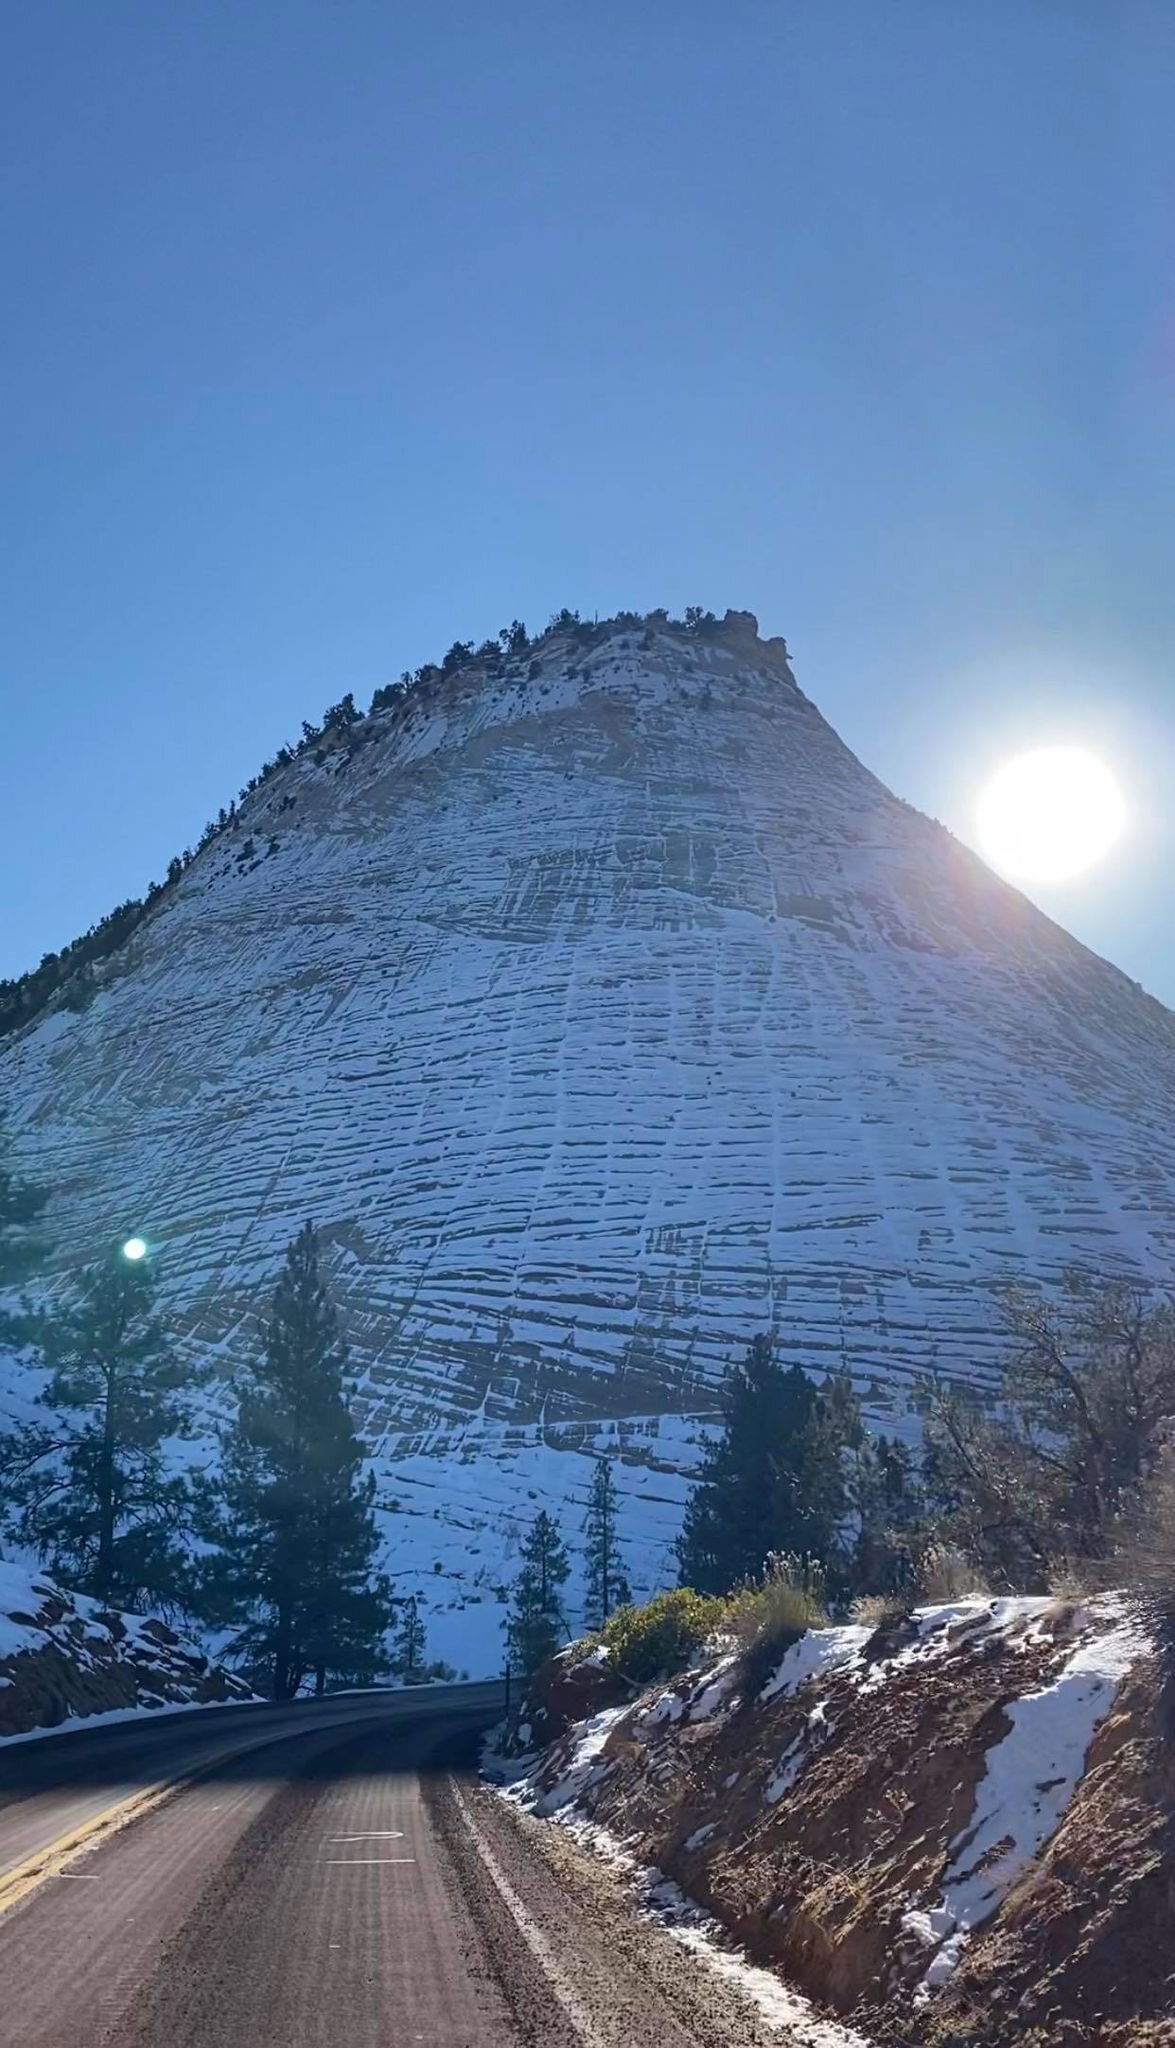 This is the checkerboard mesa along zion-mount carmel highway